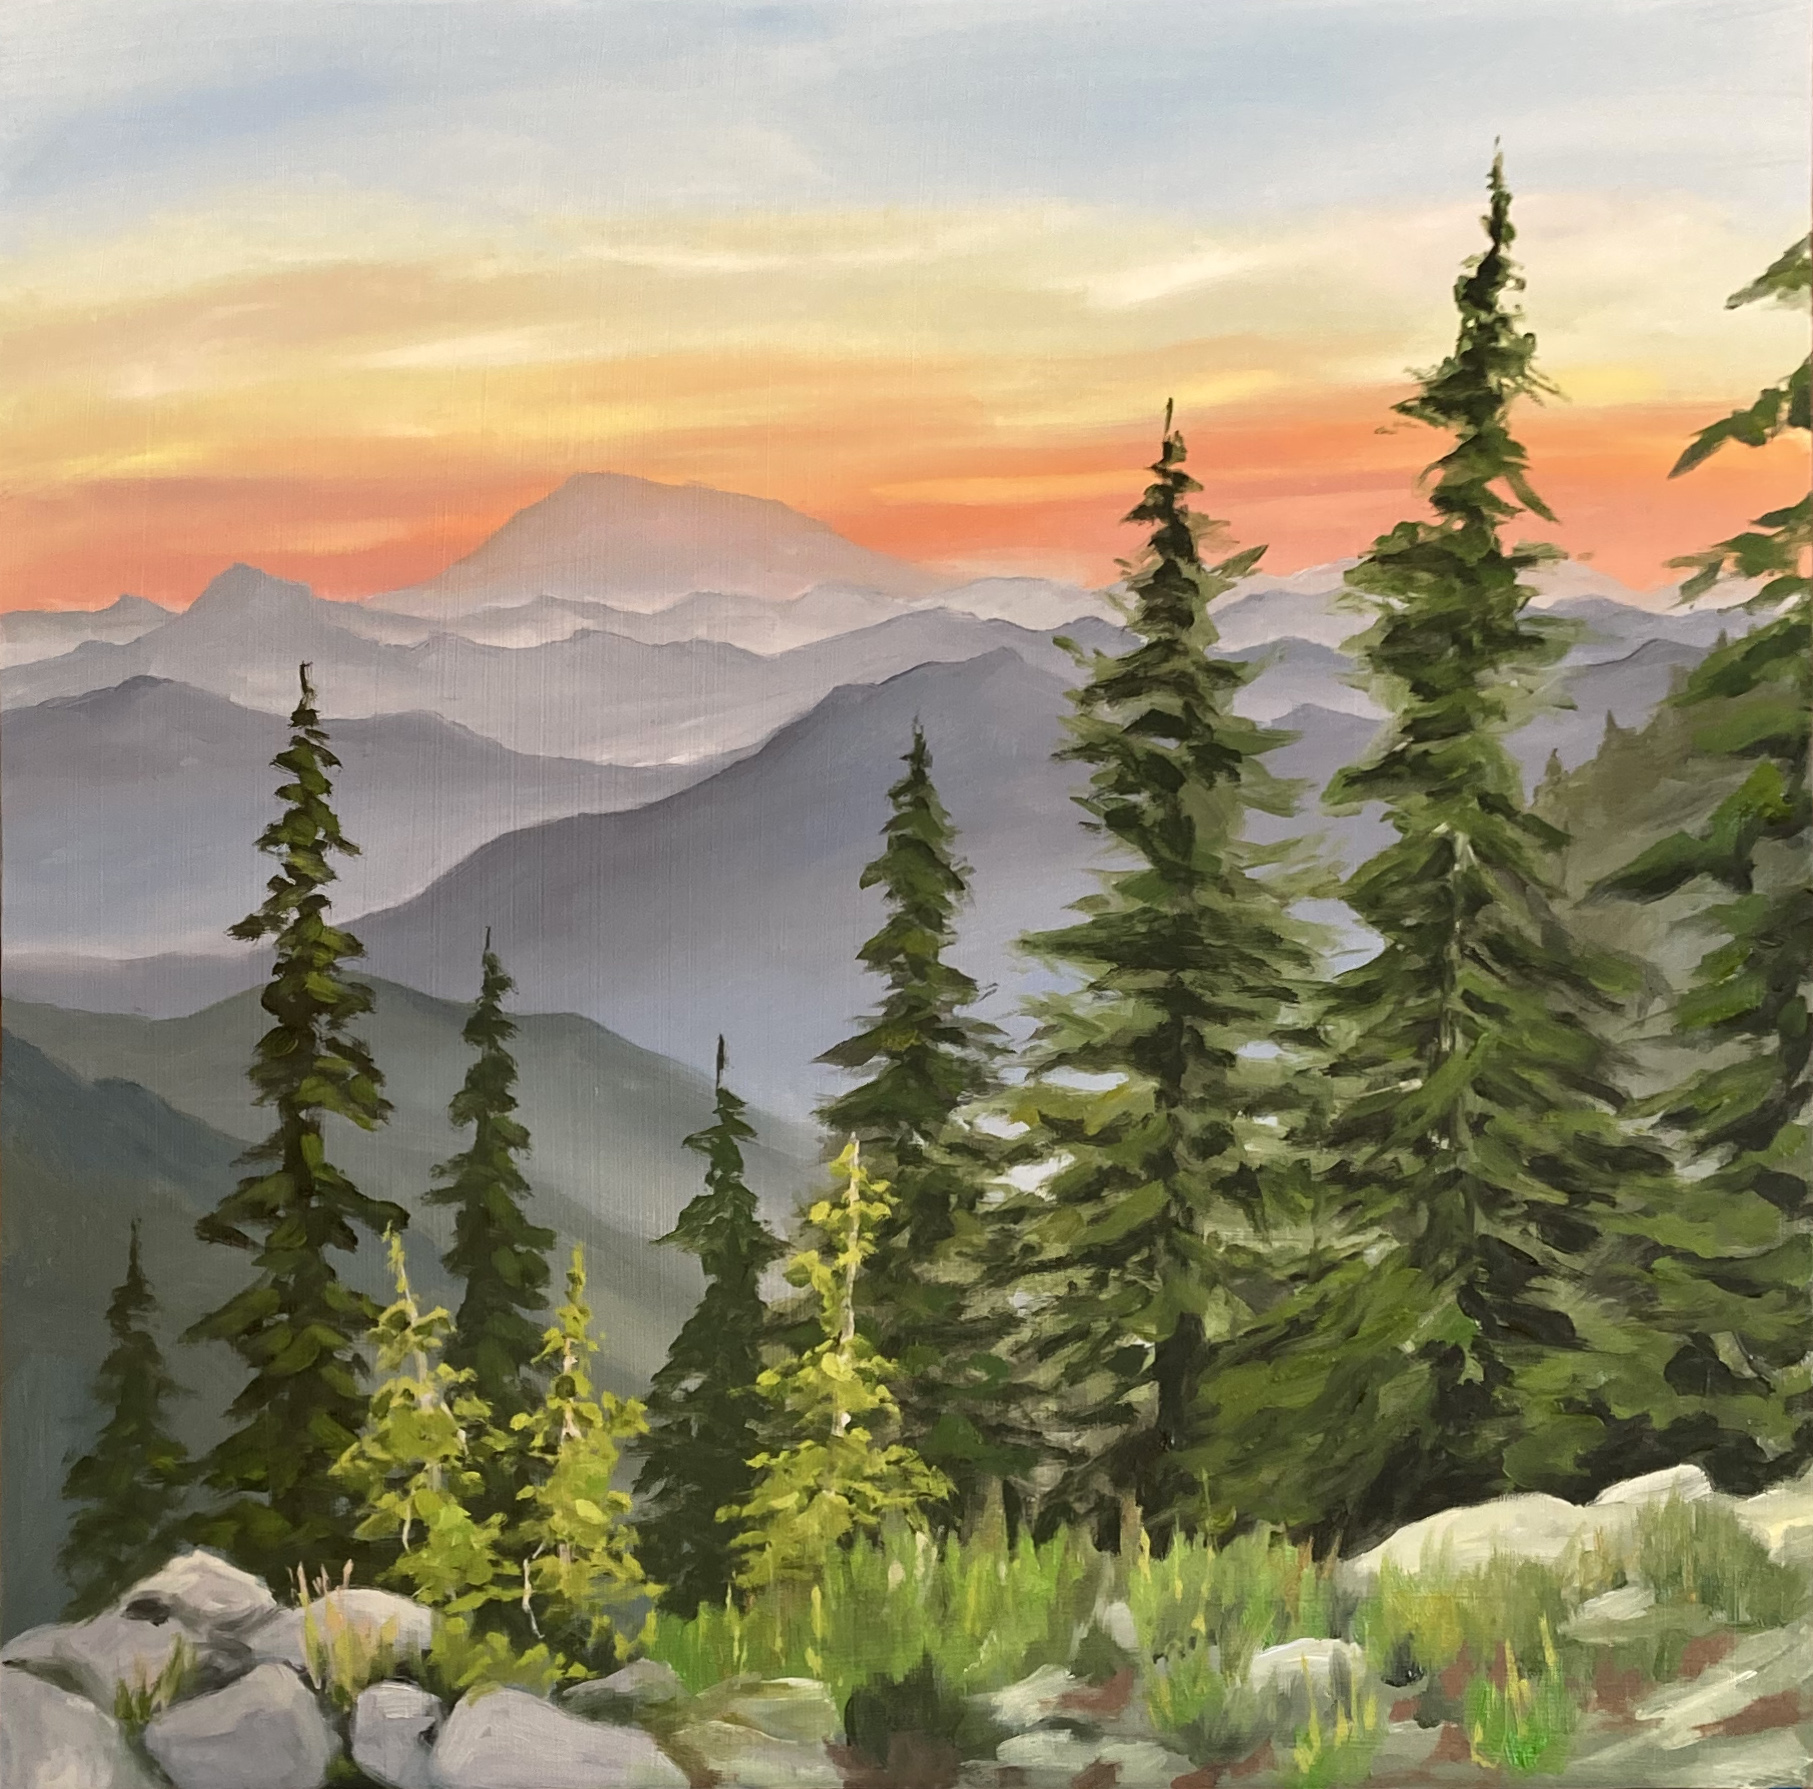 Sunset painting with Mt. St. Helens